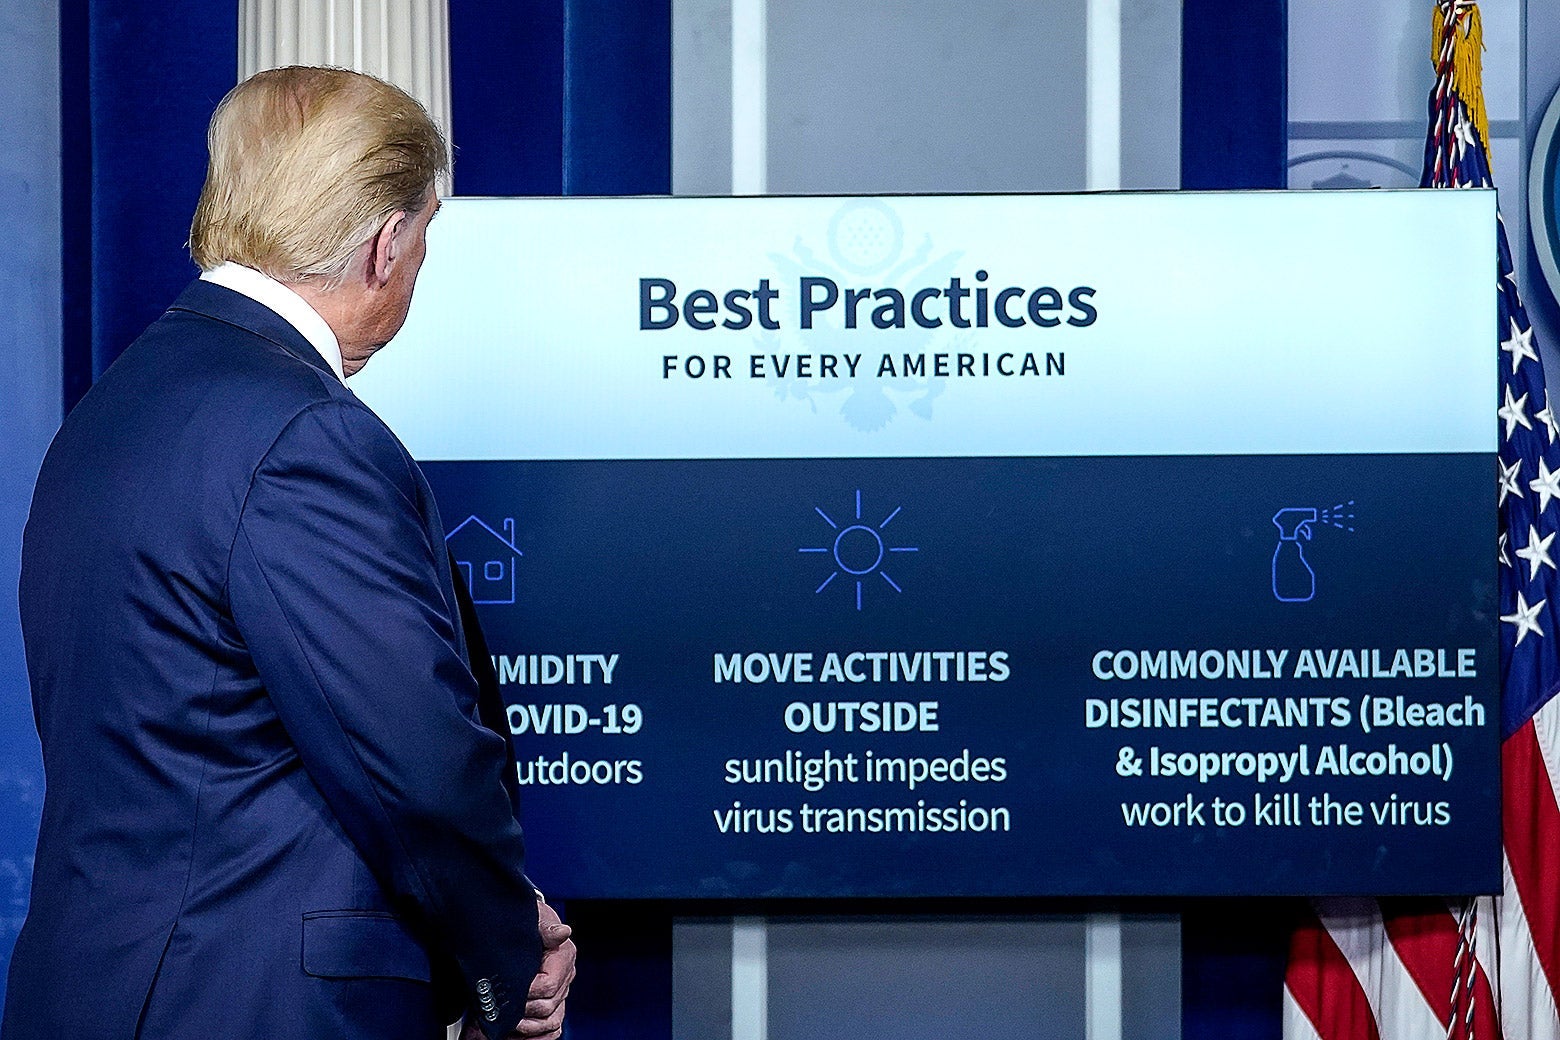 Donald Trump looks at a board behind him that says "Best Practices for Every American."